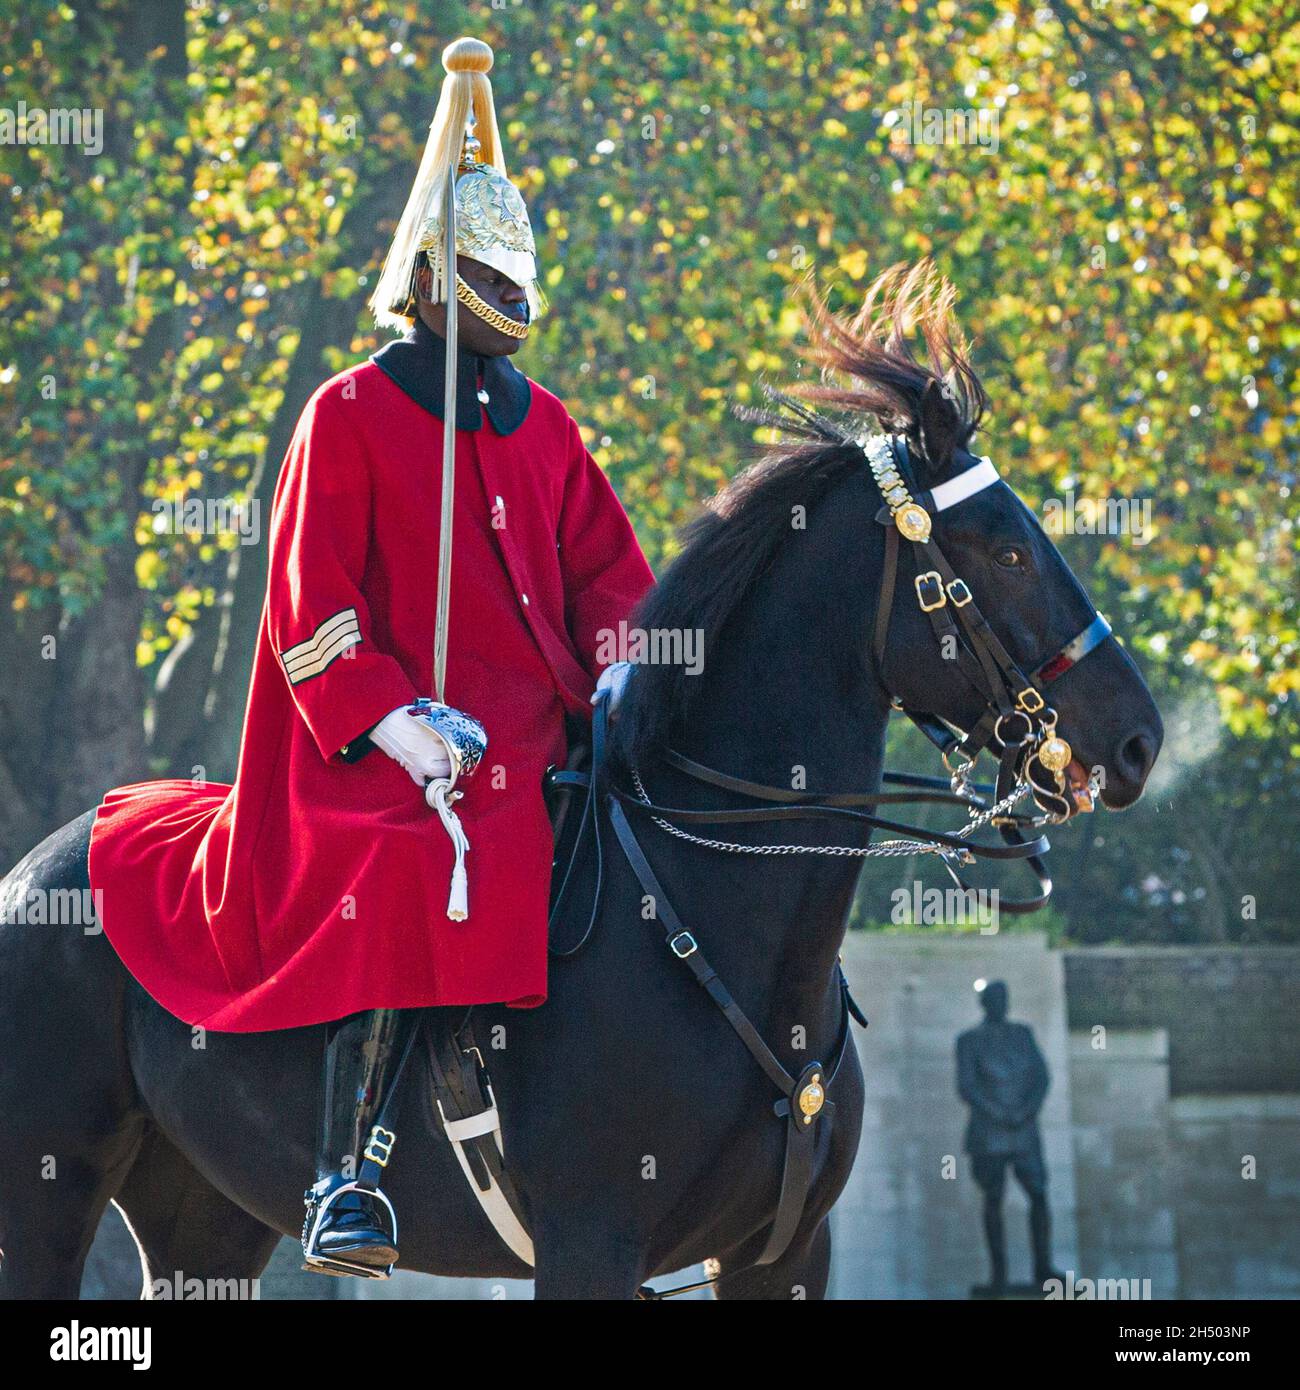 Collection 93+ Images changing of the guard at horse guards parade Superb